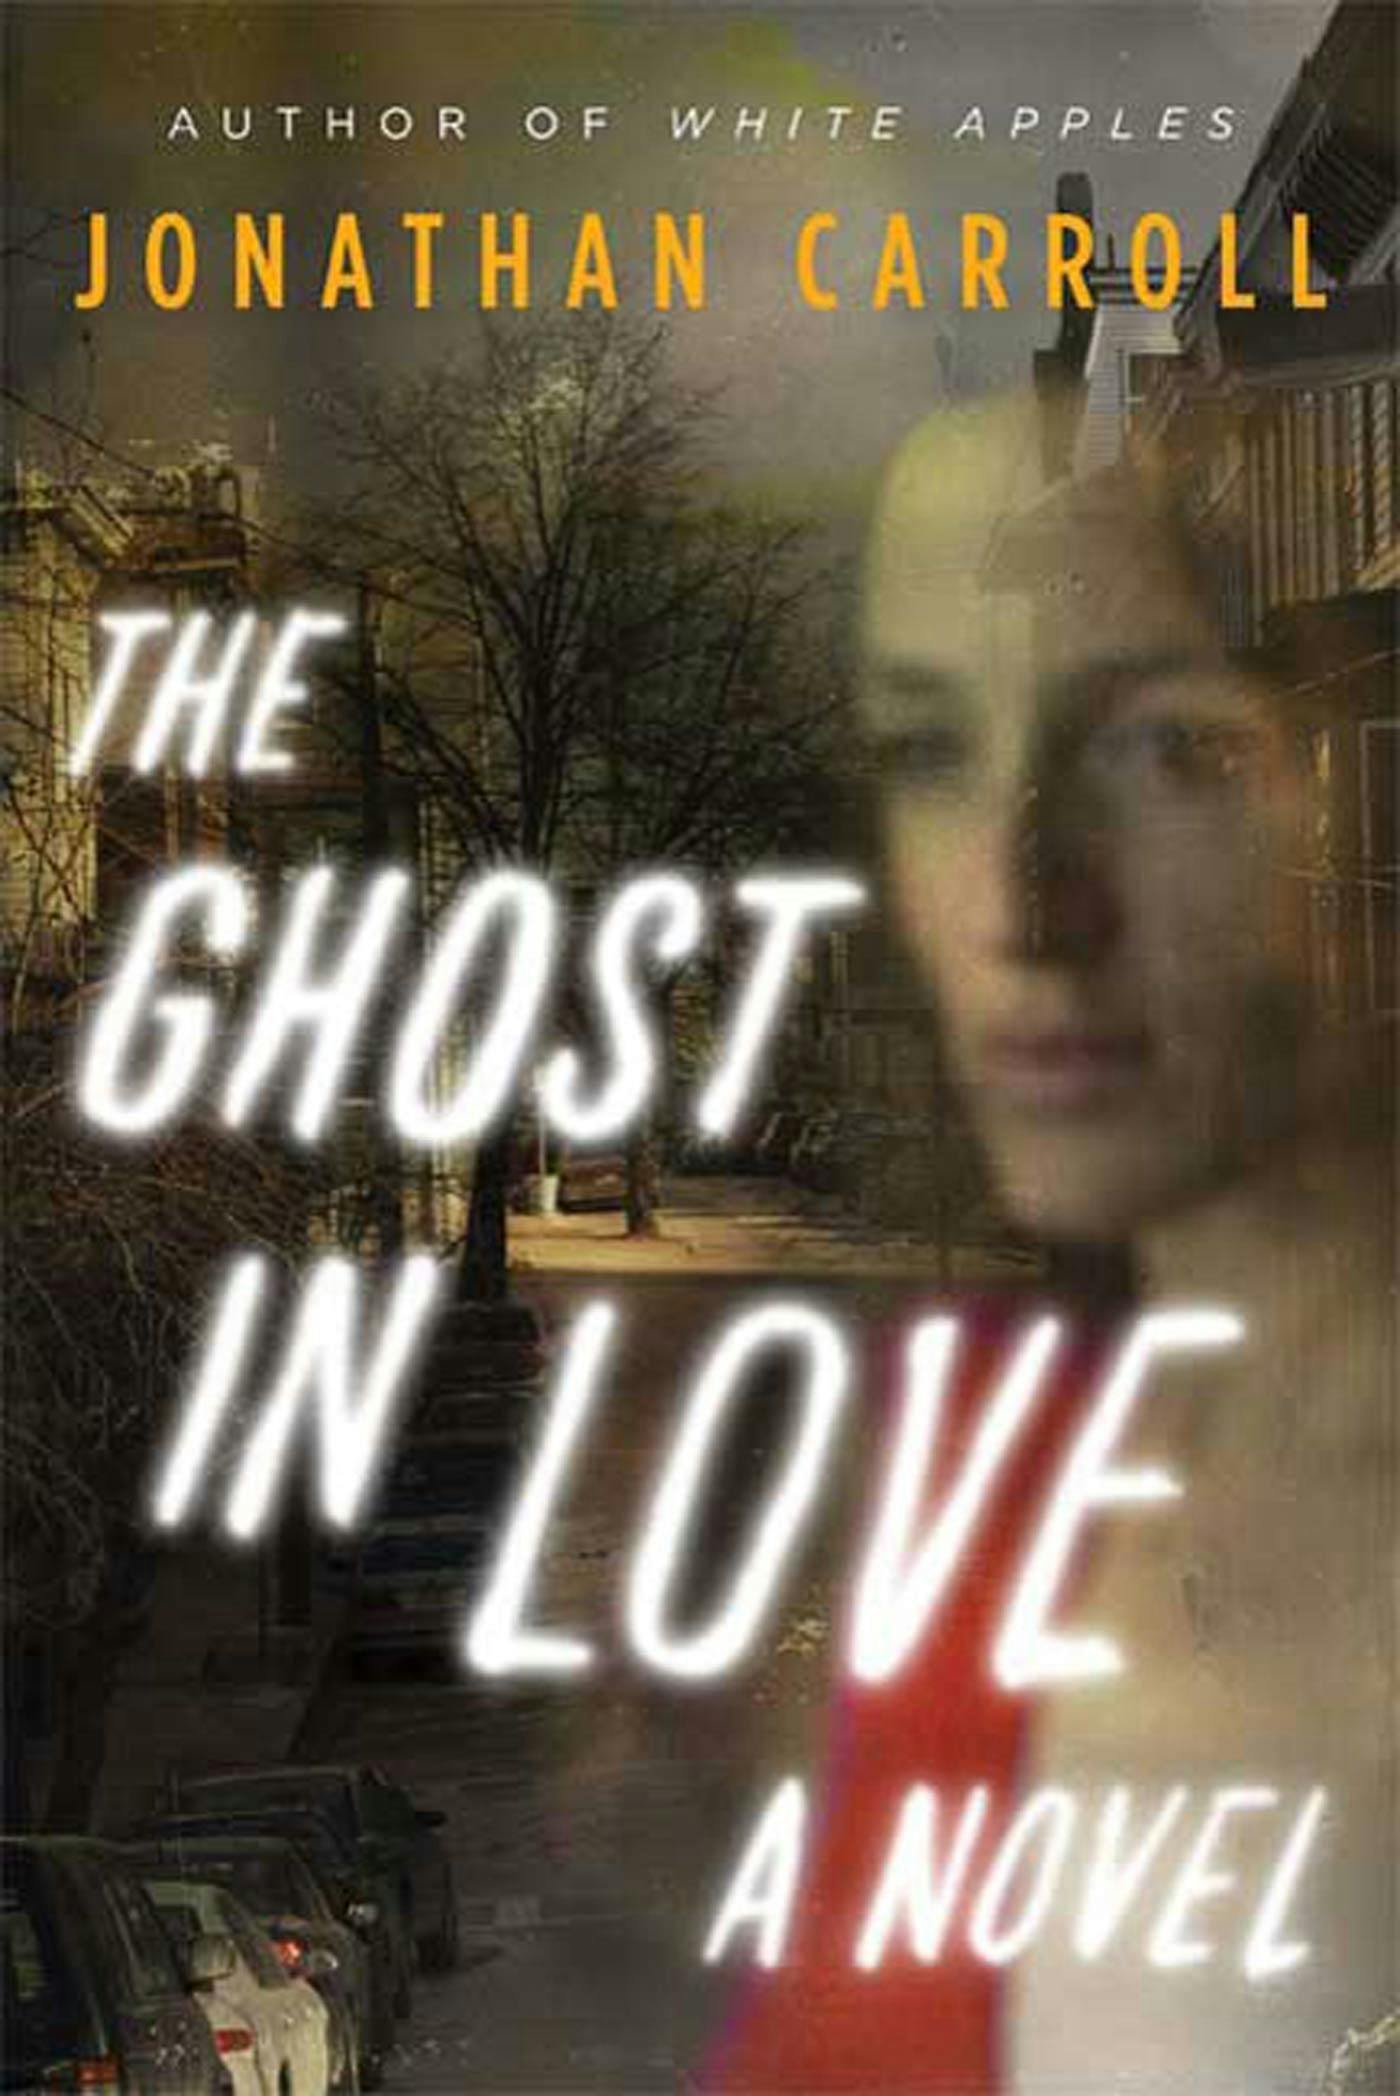 Cover for the book titled as: The Ghost in Love